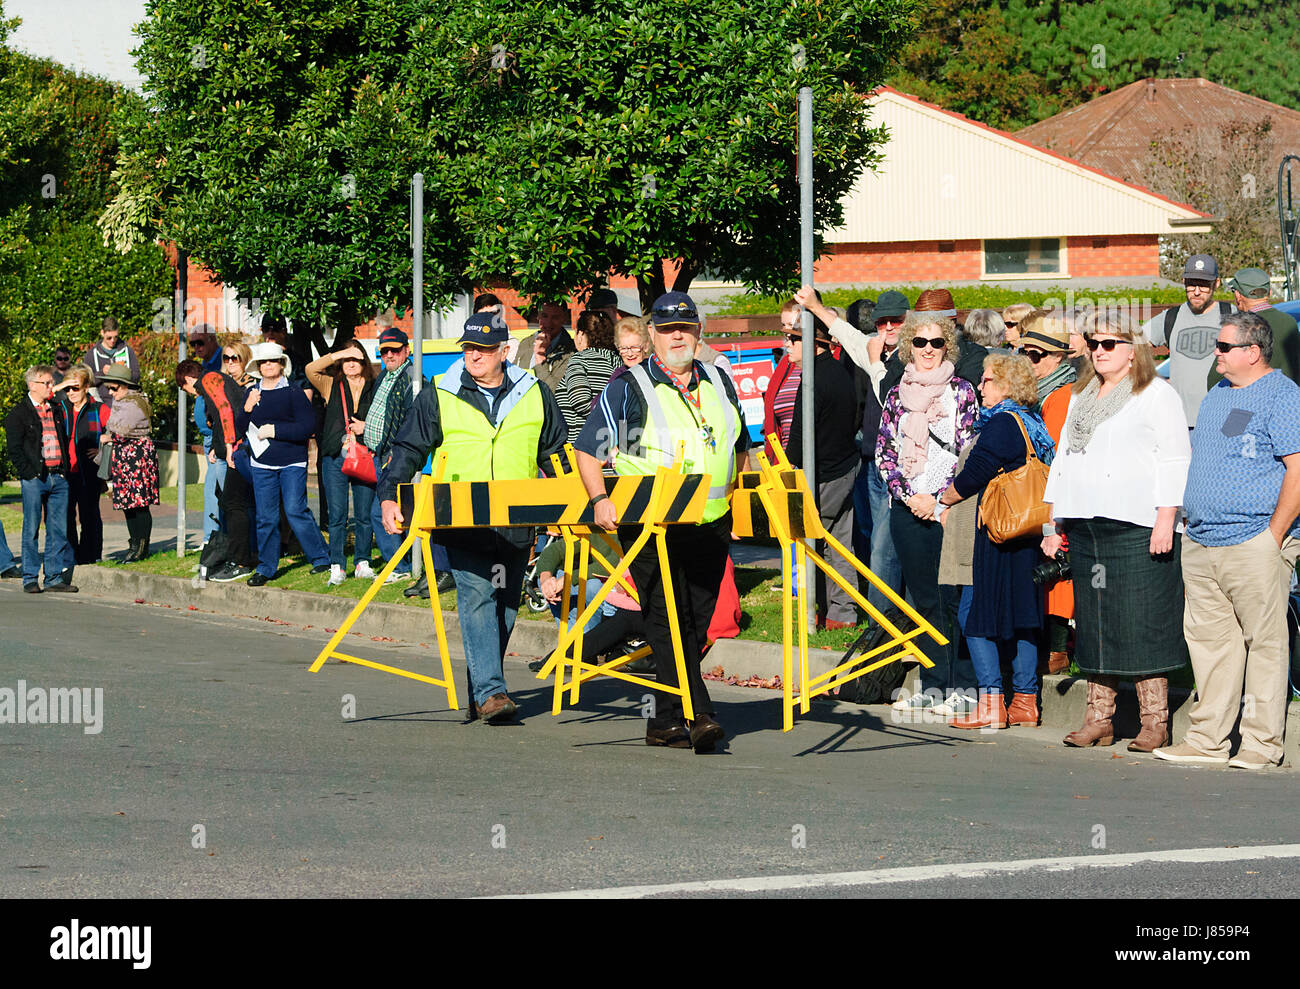 Crowd control operatives wearing hi vis jackets closing off the street during a festival, Berry, New South Wales, NSW, Australia Stock Photo